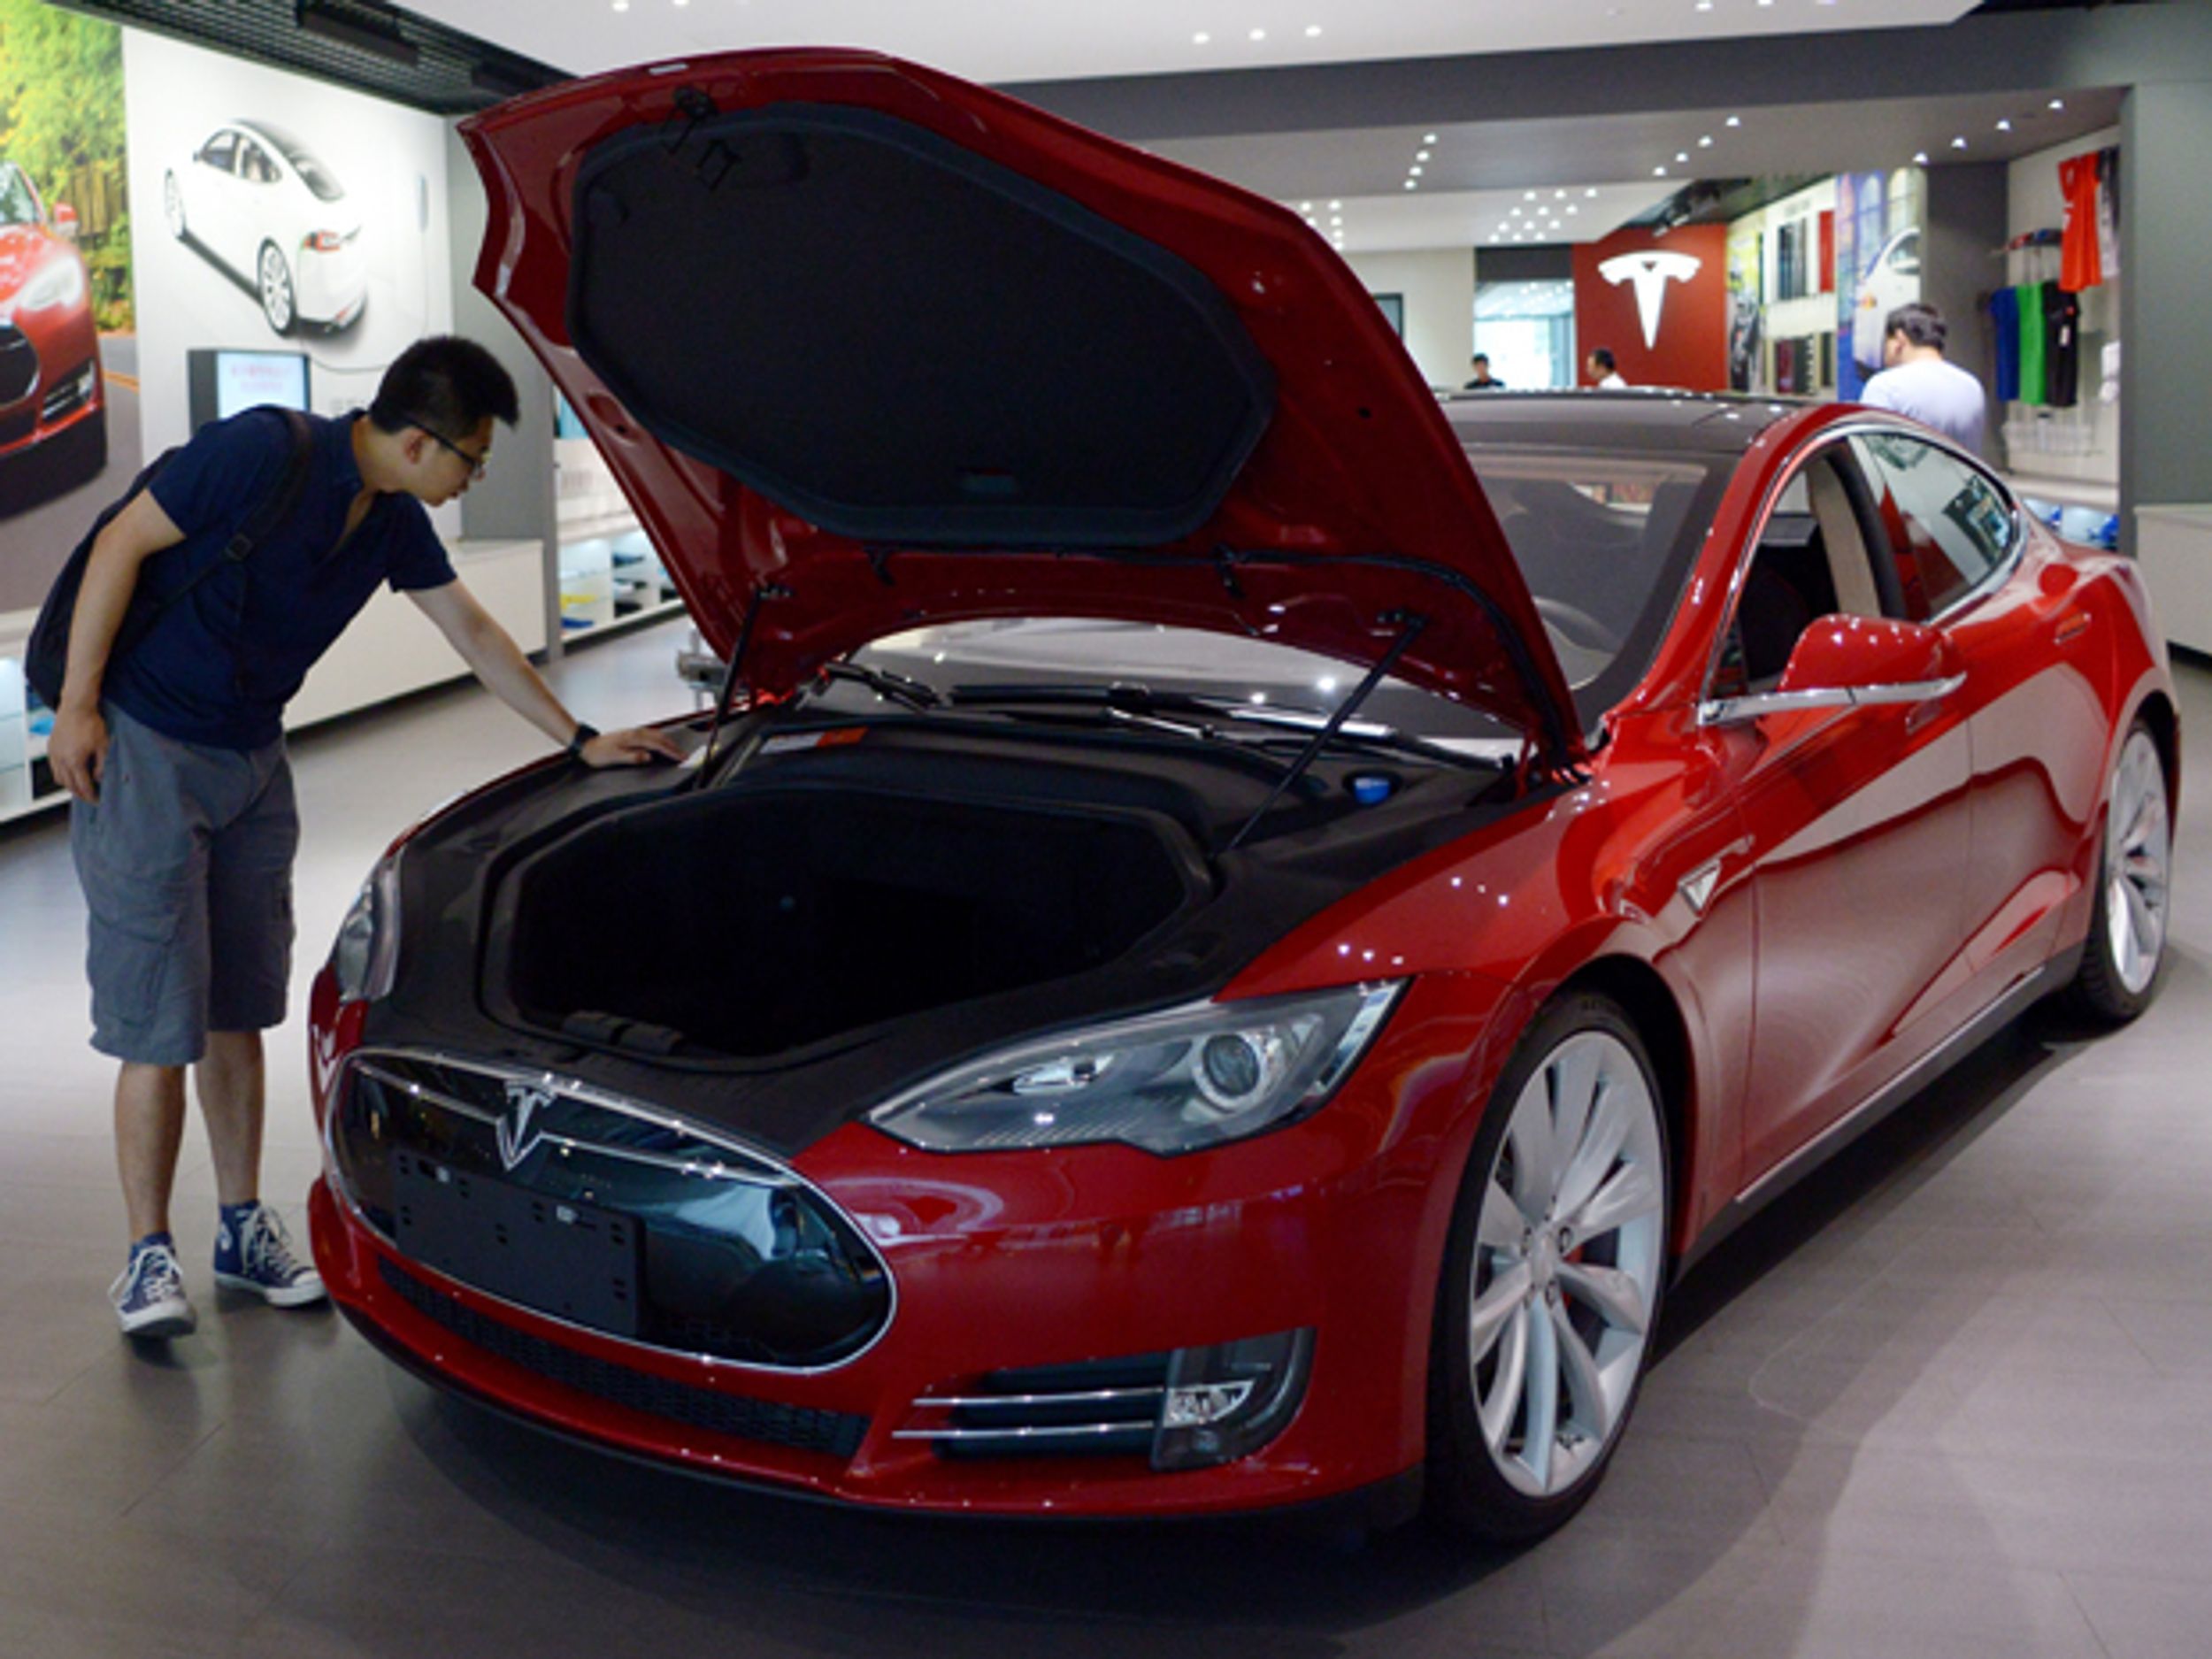 A man checks out the engine of a red Tesla car